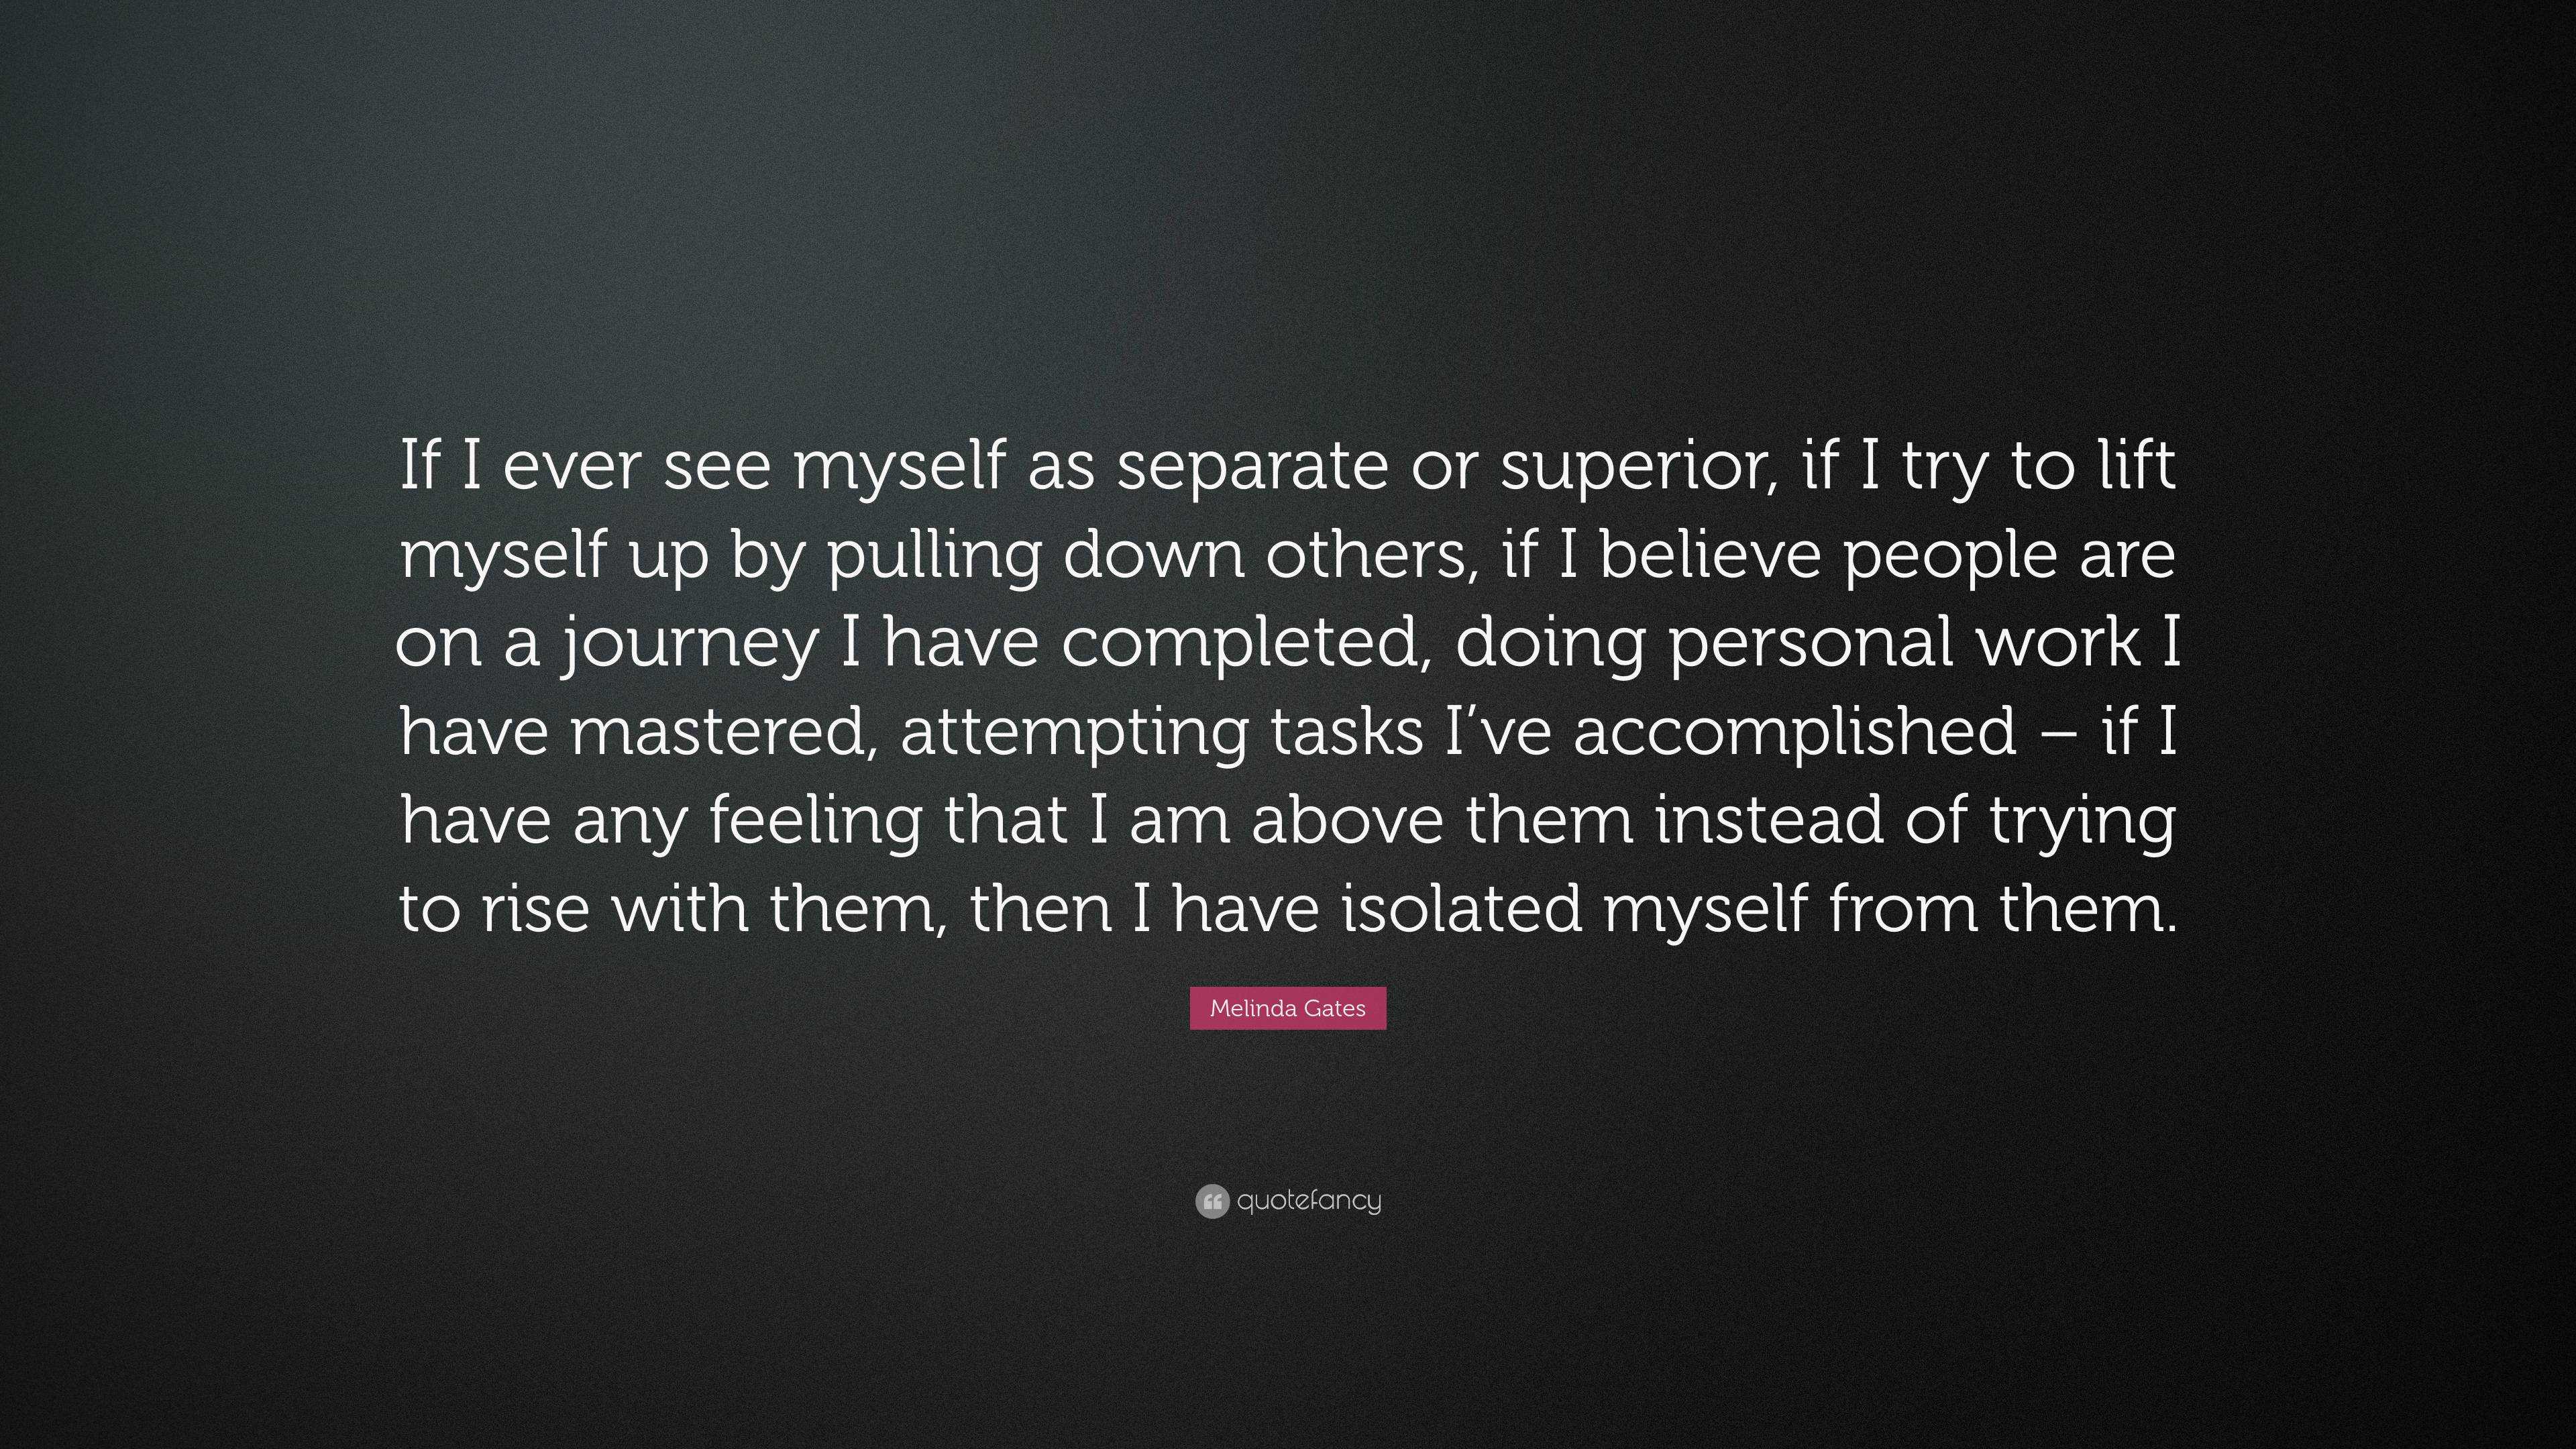 https://quotefancy.com/media/wallpaper/3840x2160/6560944-Melinda-Gates-Quote-If-I-ever-see-myself-as-separate-or-superior.jpg